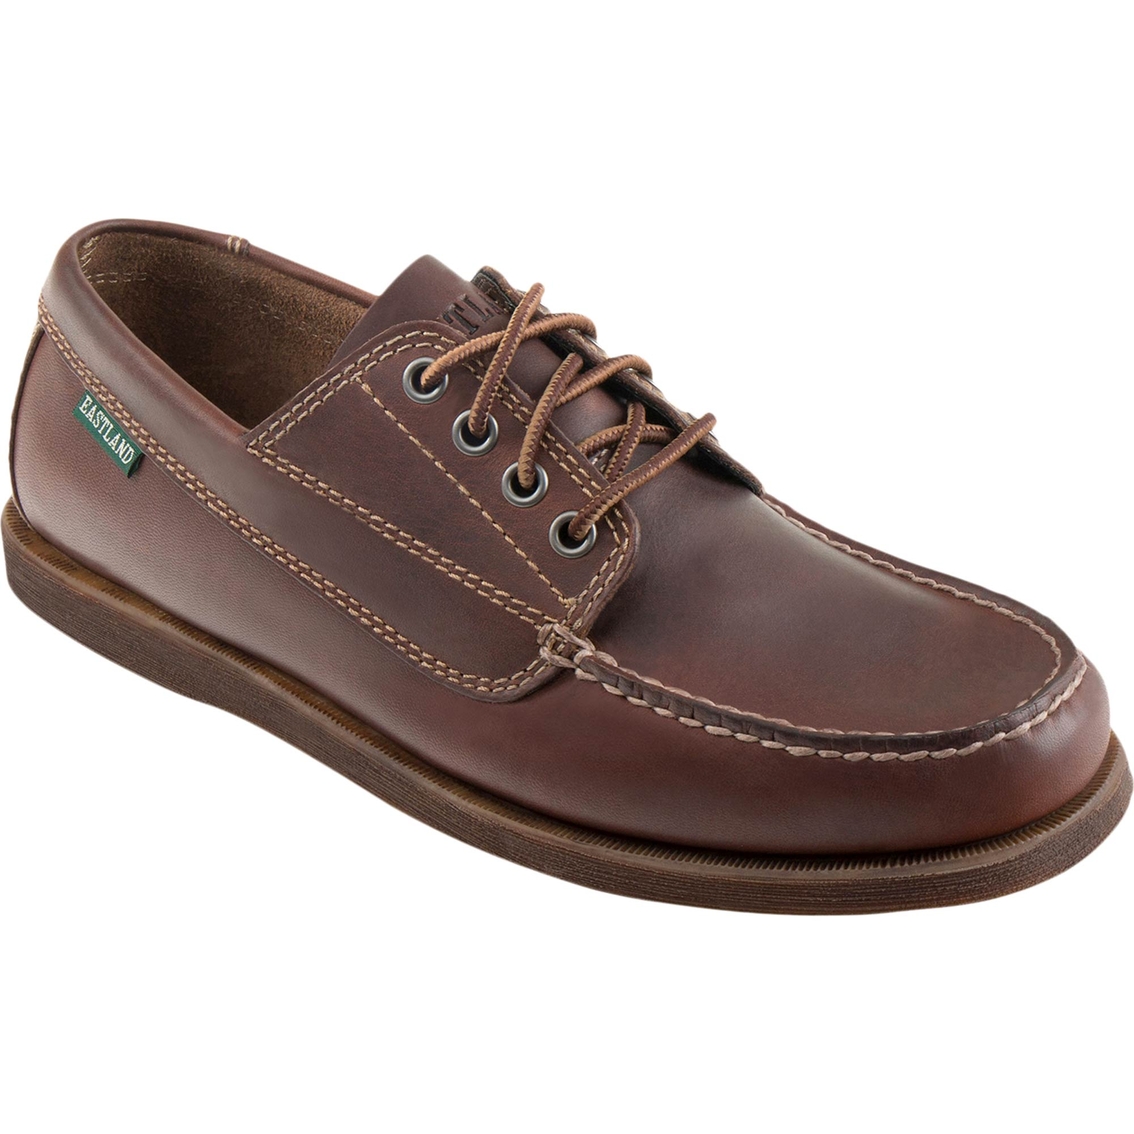 Eastland Falmouth Camp Moc Oxford Shoes | Casuals | Shoes | Shop The ...